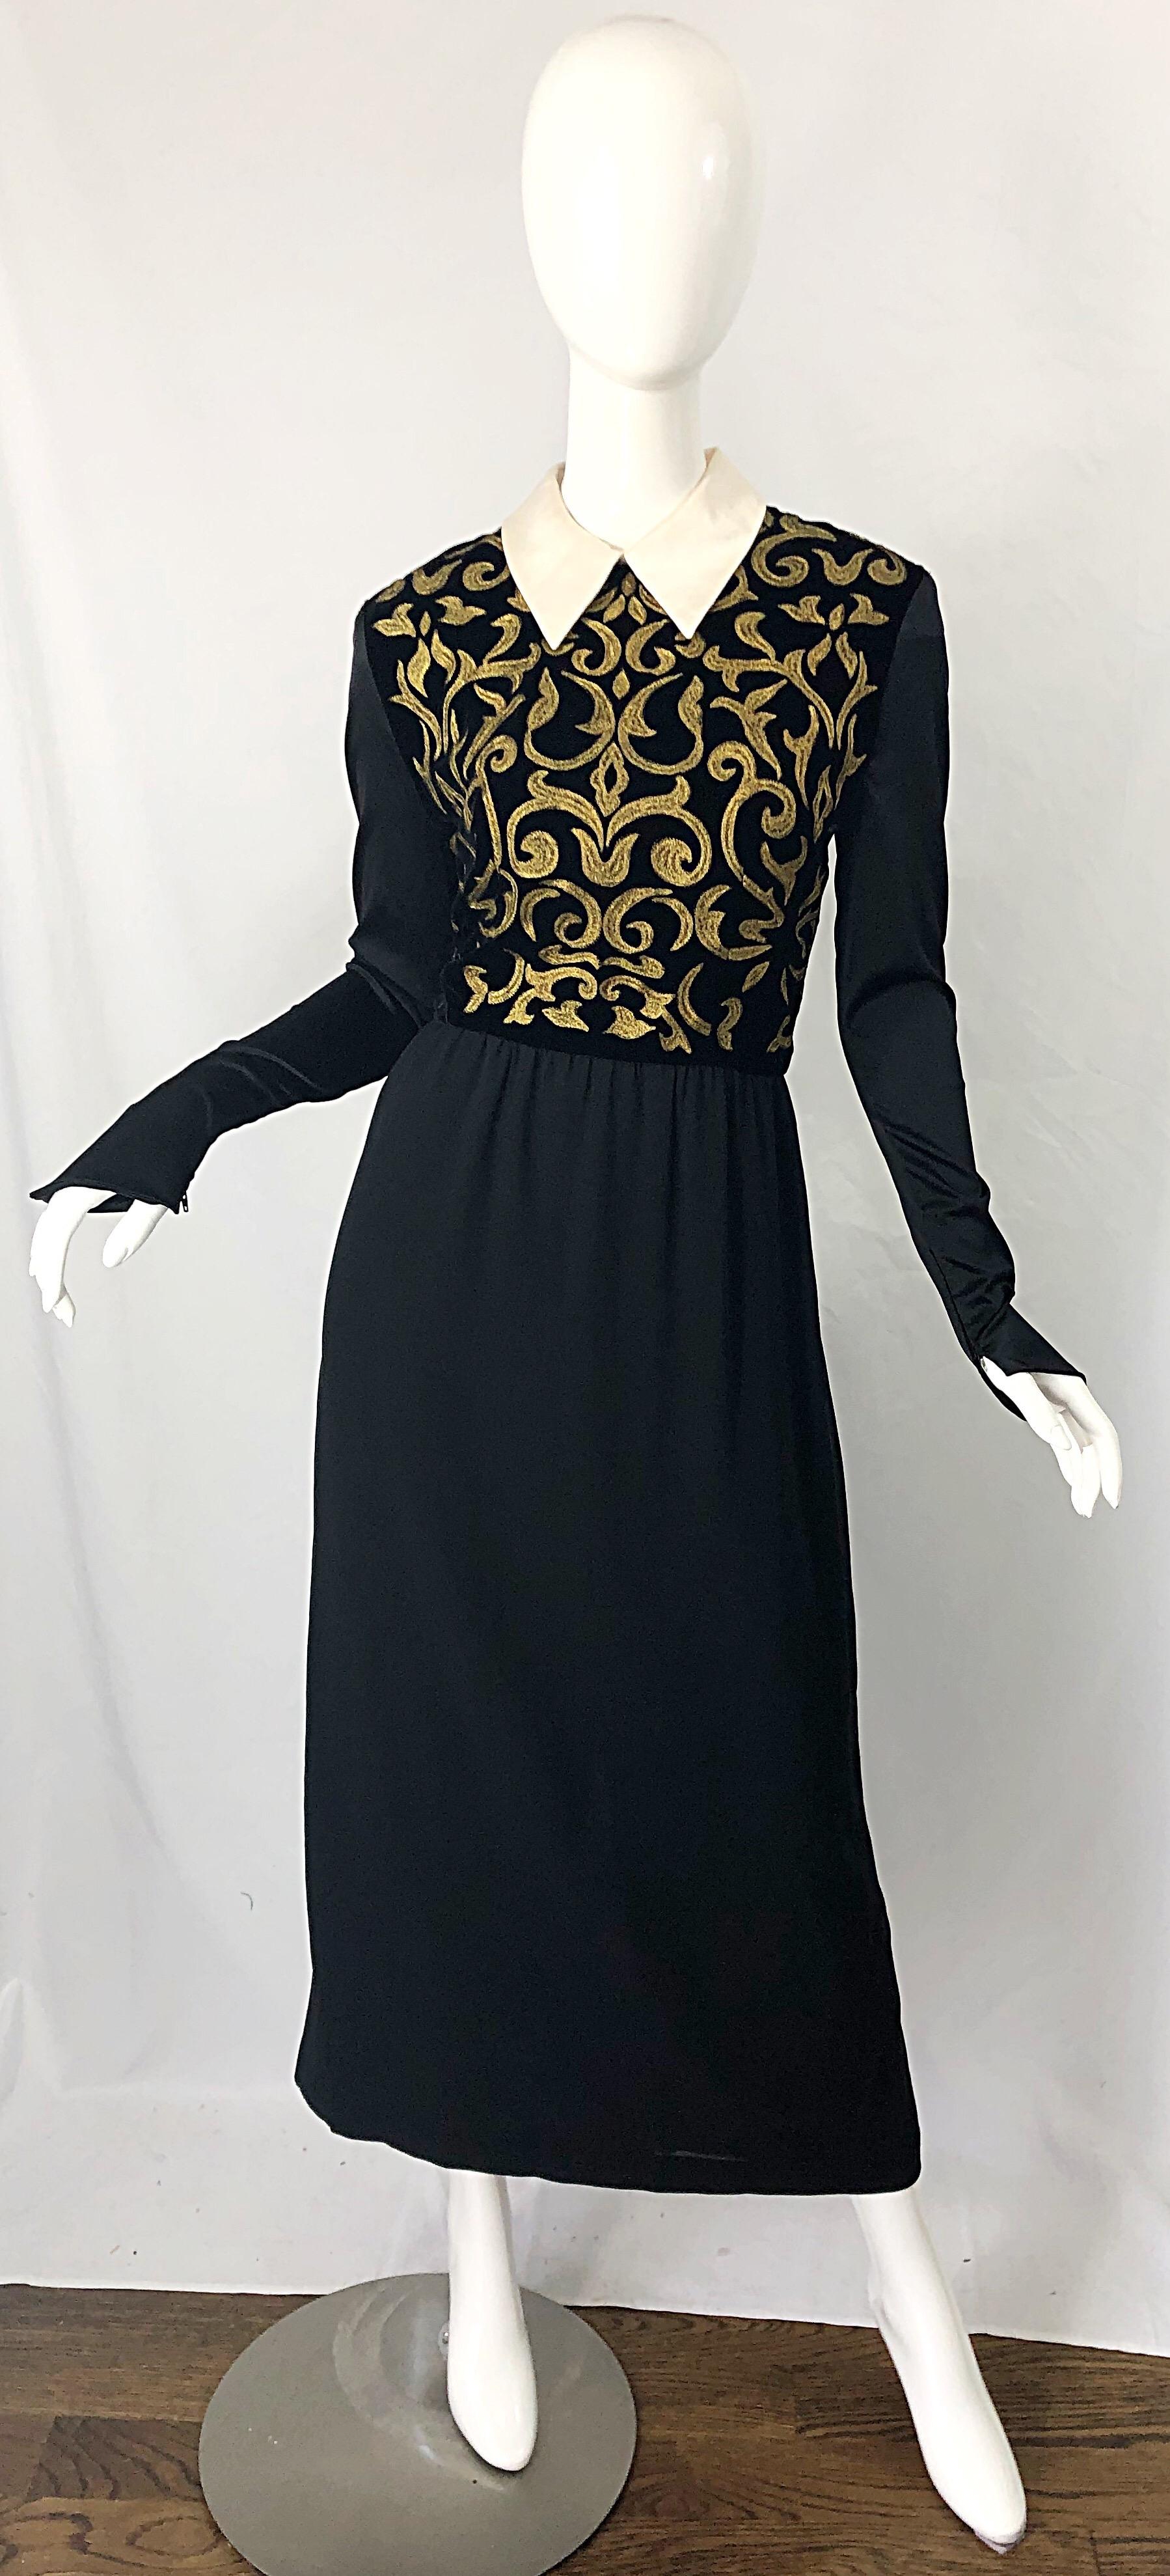 Karl Lagerfeld Runway Fall 1988 Black Gold Embroidered Vintage 80s Gown Dress For Sale 9